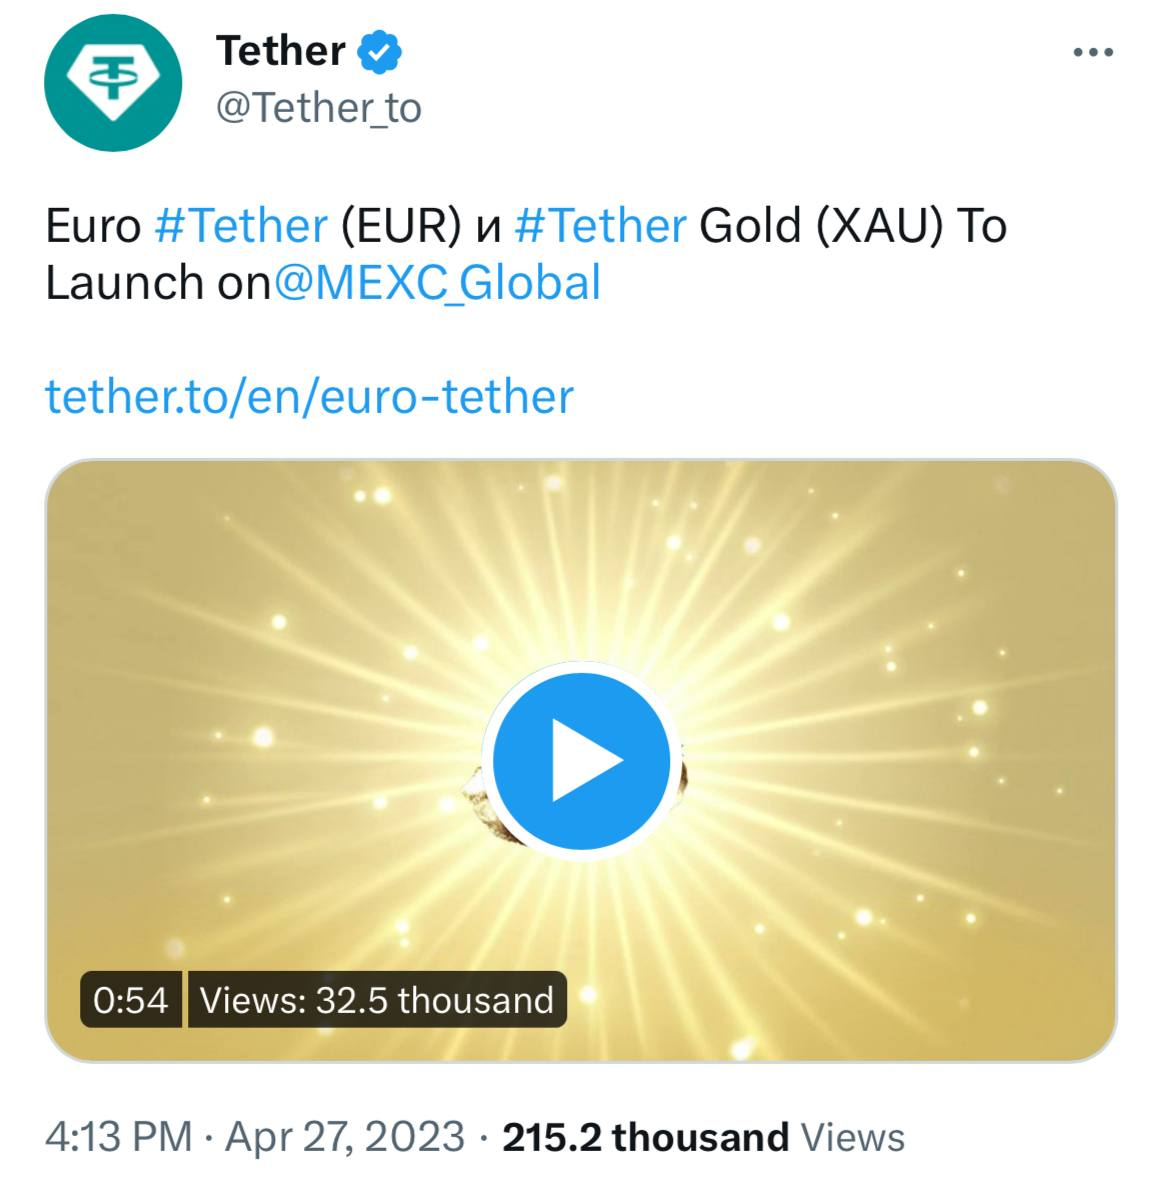 Tether tweet about cooperation with MEXC Global.